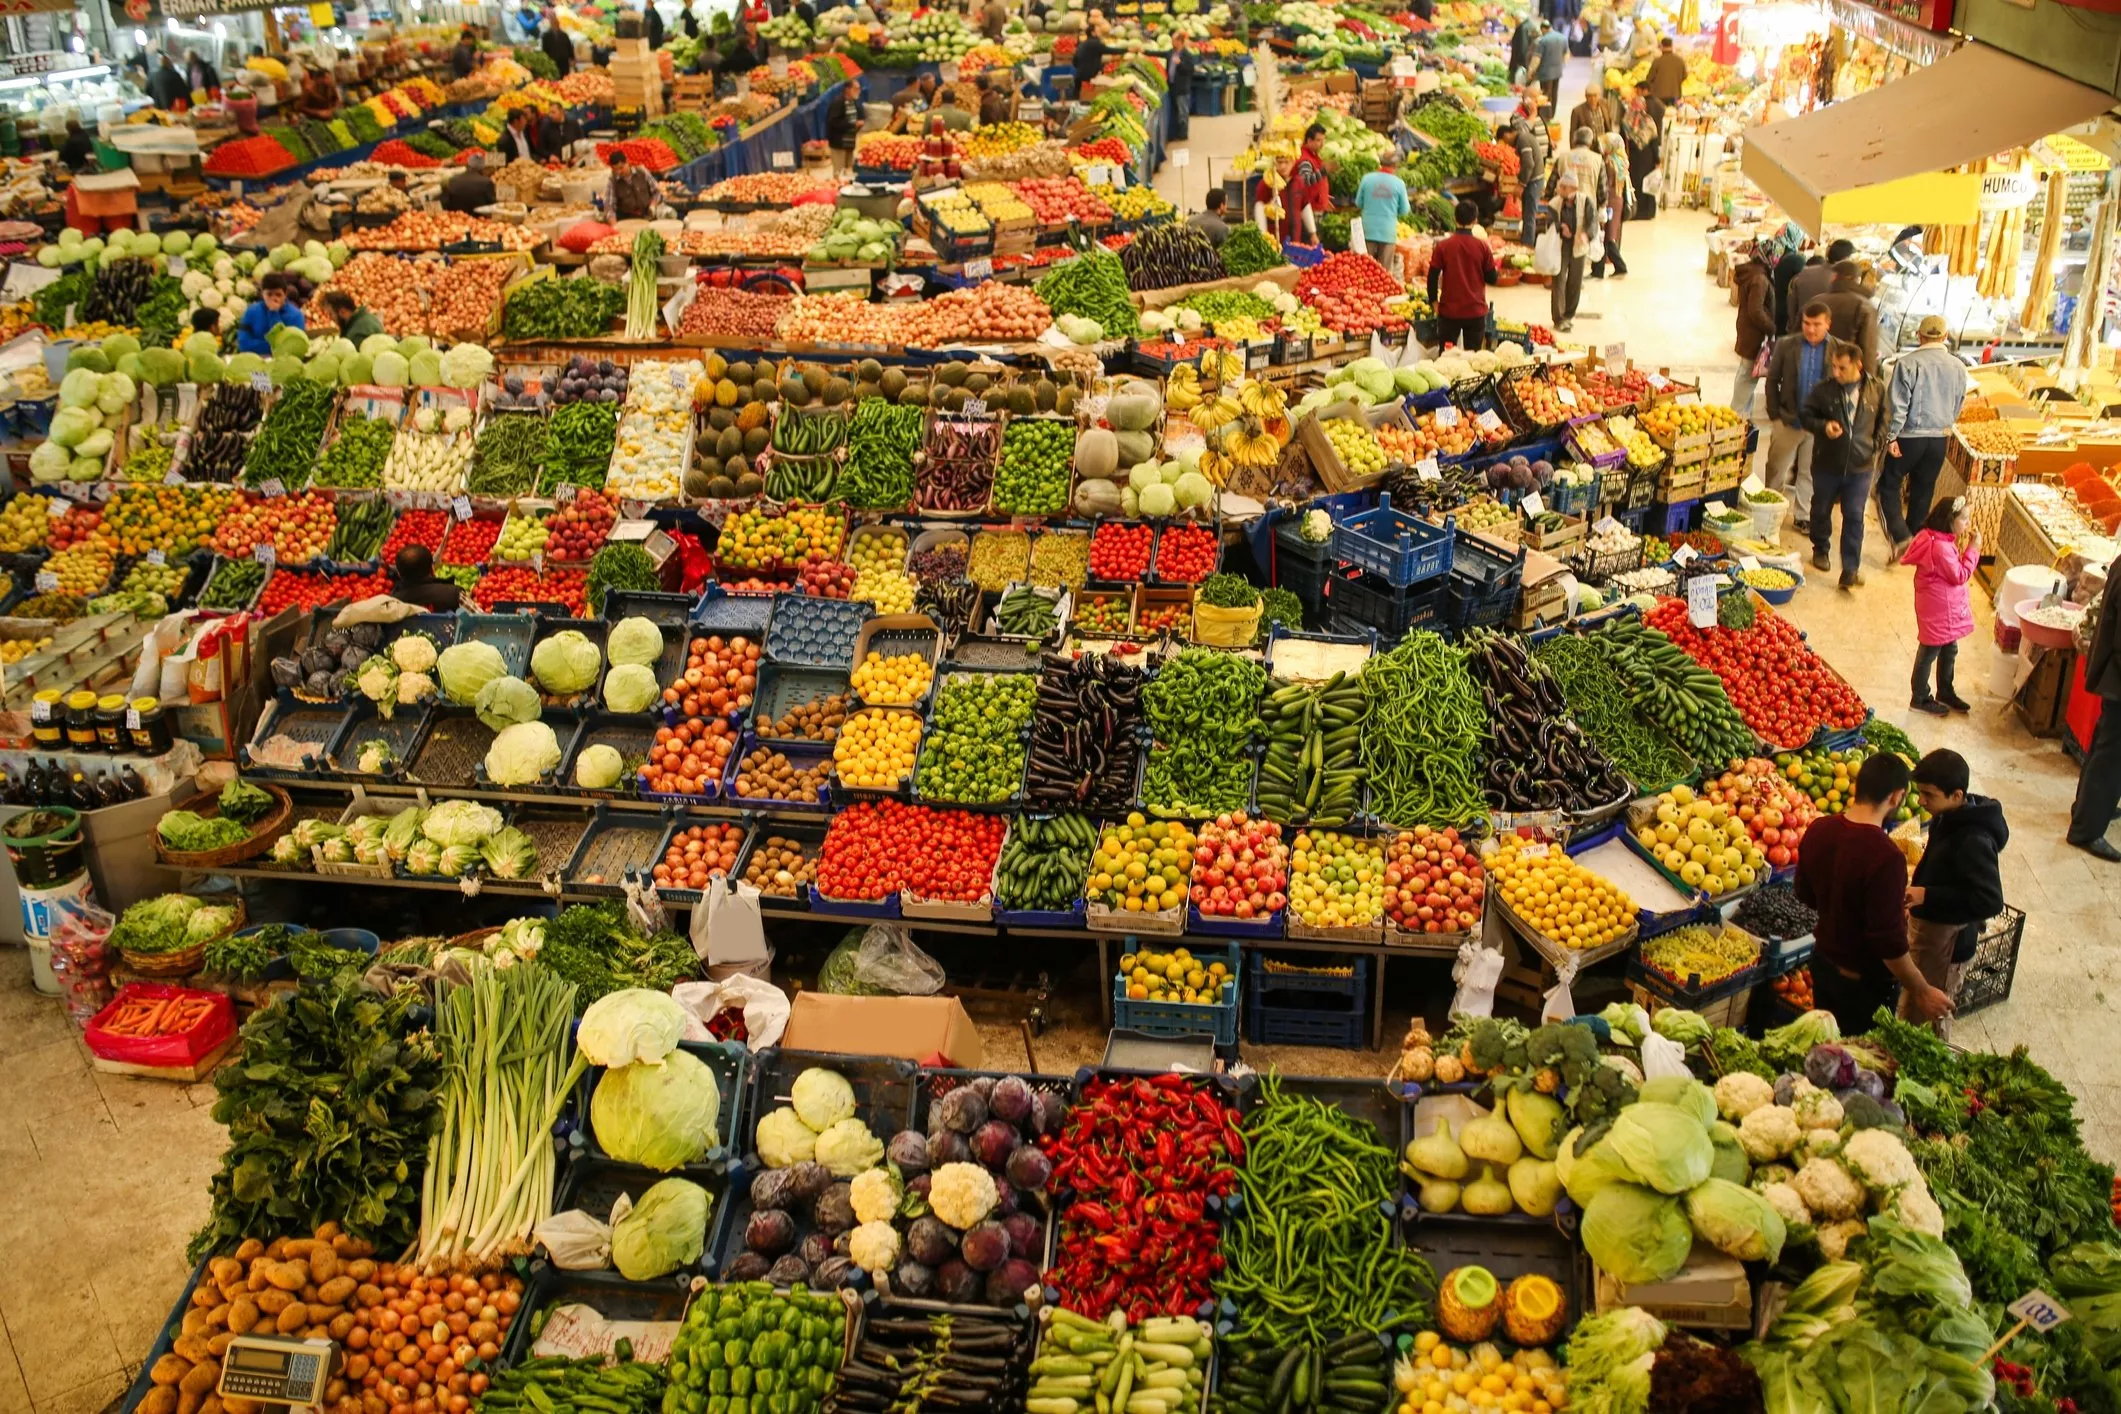 Women's Bazaar in Turkey, central_asia | Spices,Groceries,Sweets,Fruit & Vegetable,Herbs - Country Helper